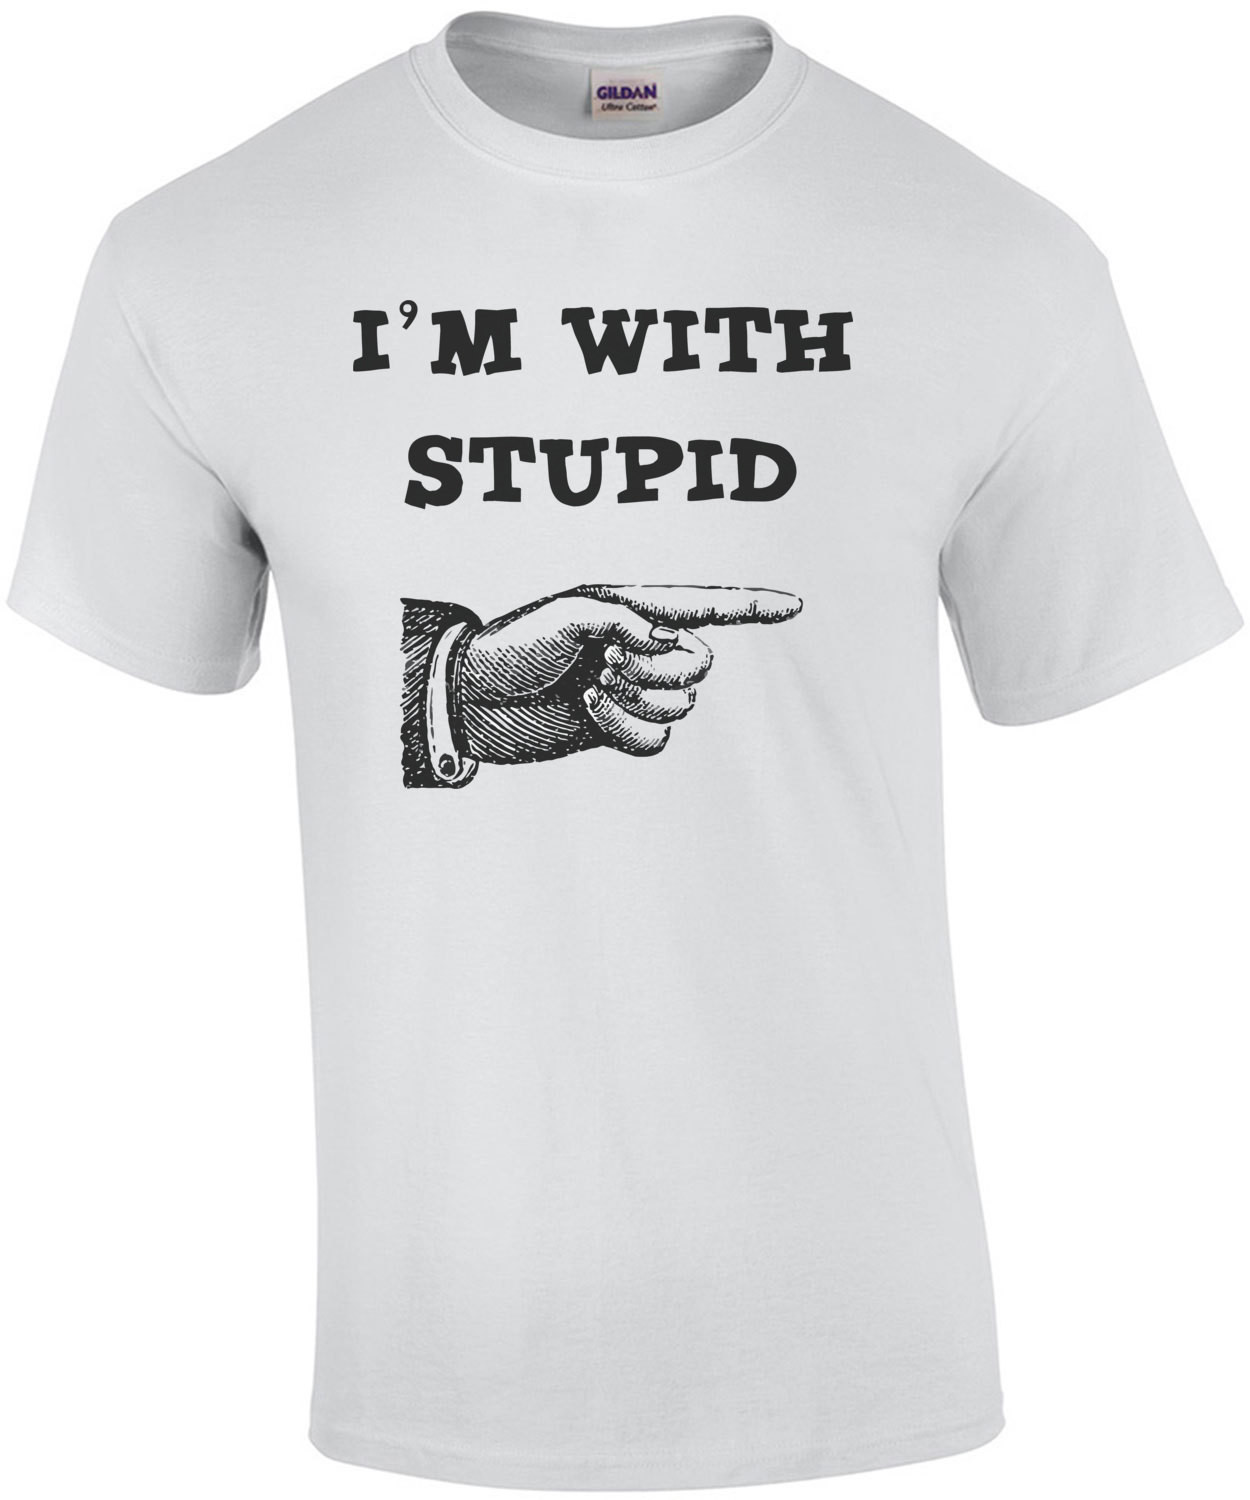 I'm with stupid - Funny T-Shirt